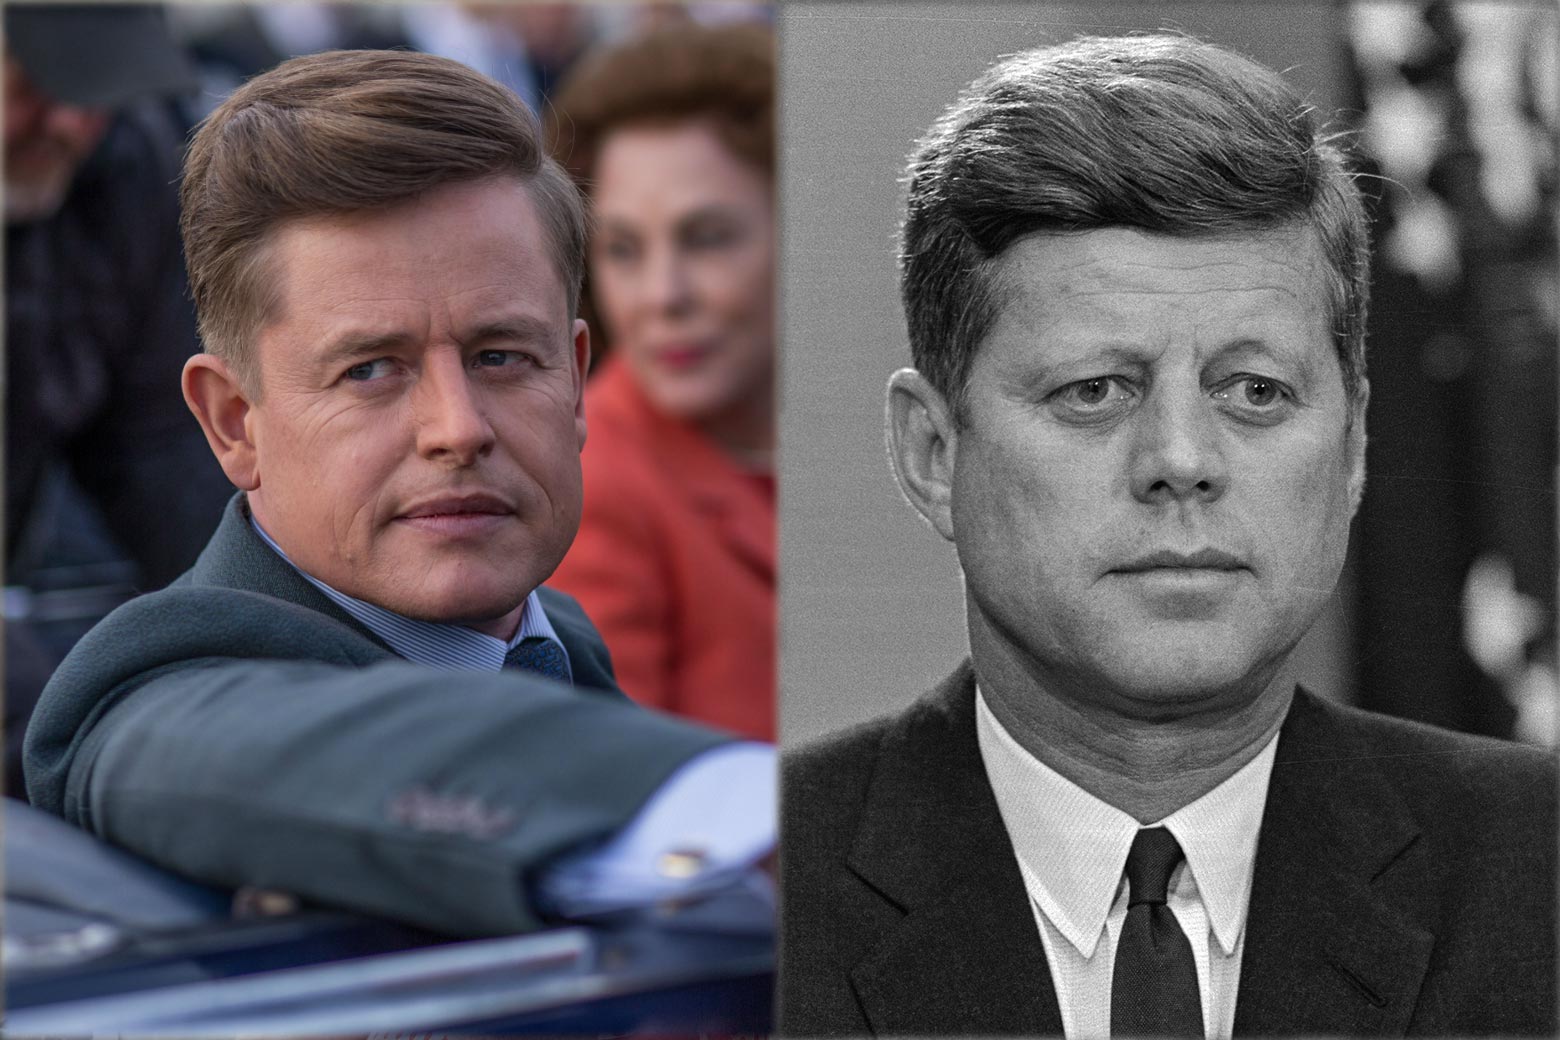 Phillipson as JFK in Jackie contrasted with a real headshot of JFK. 